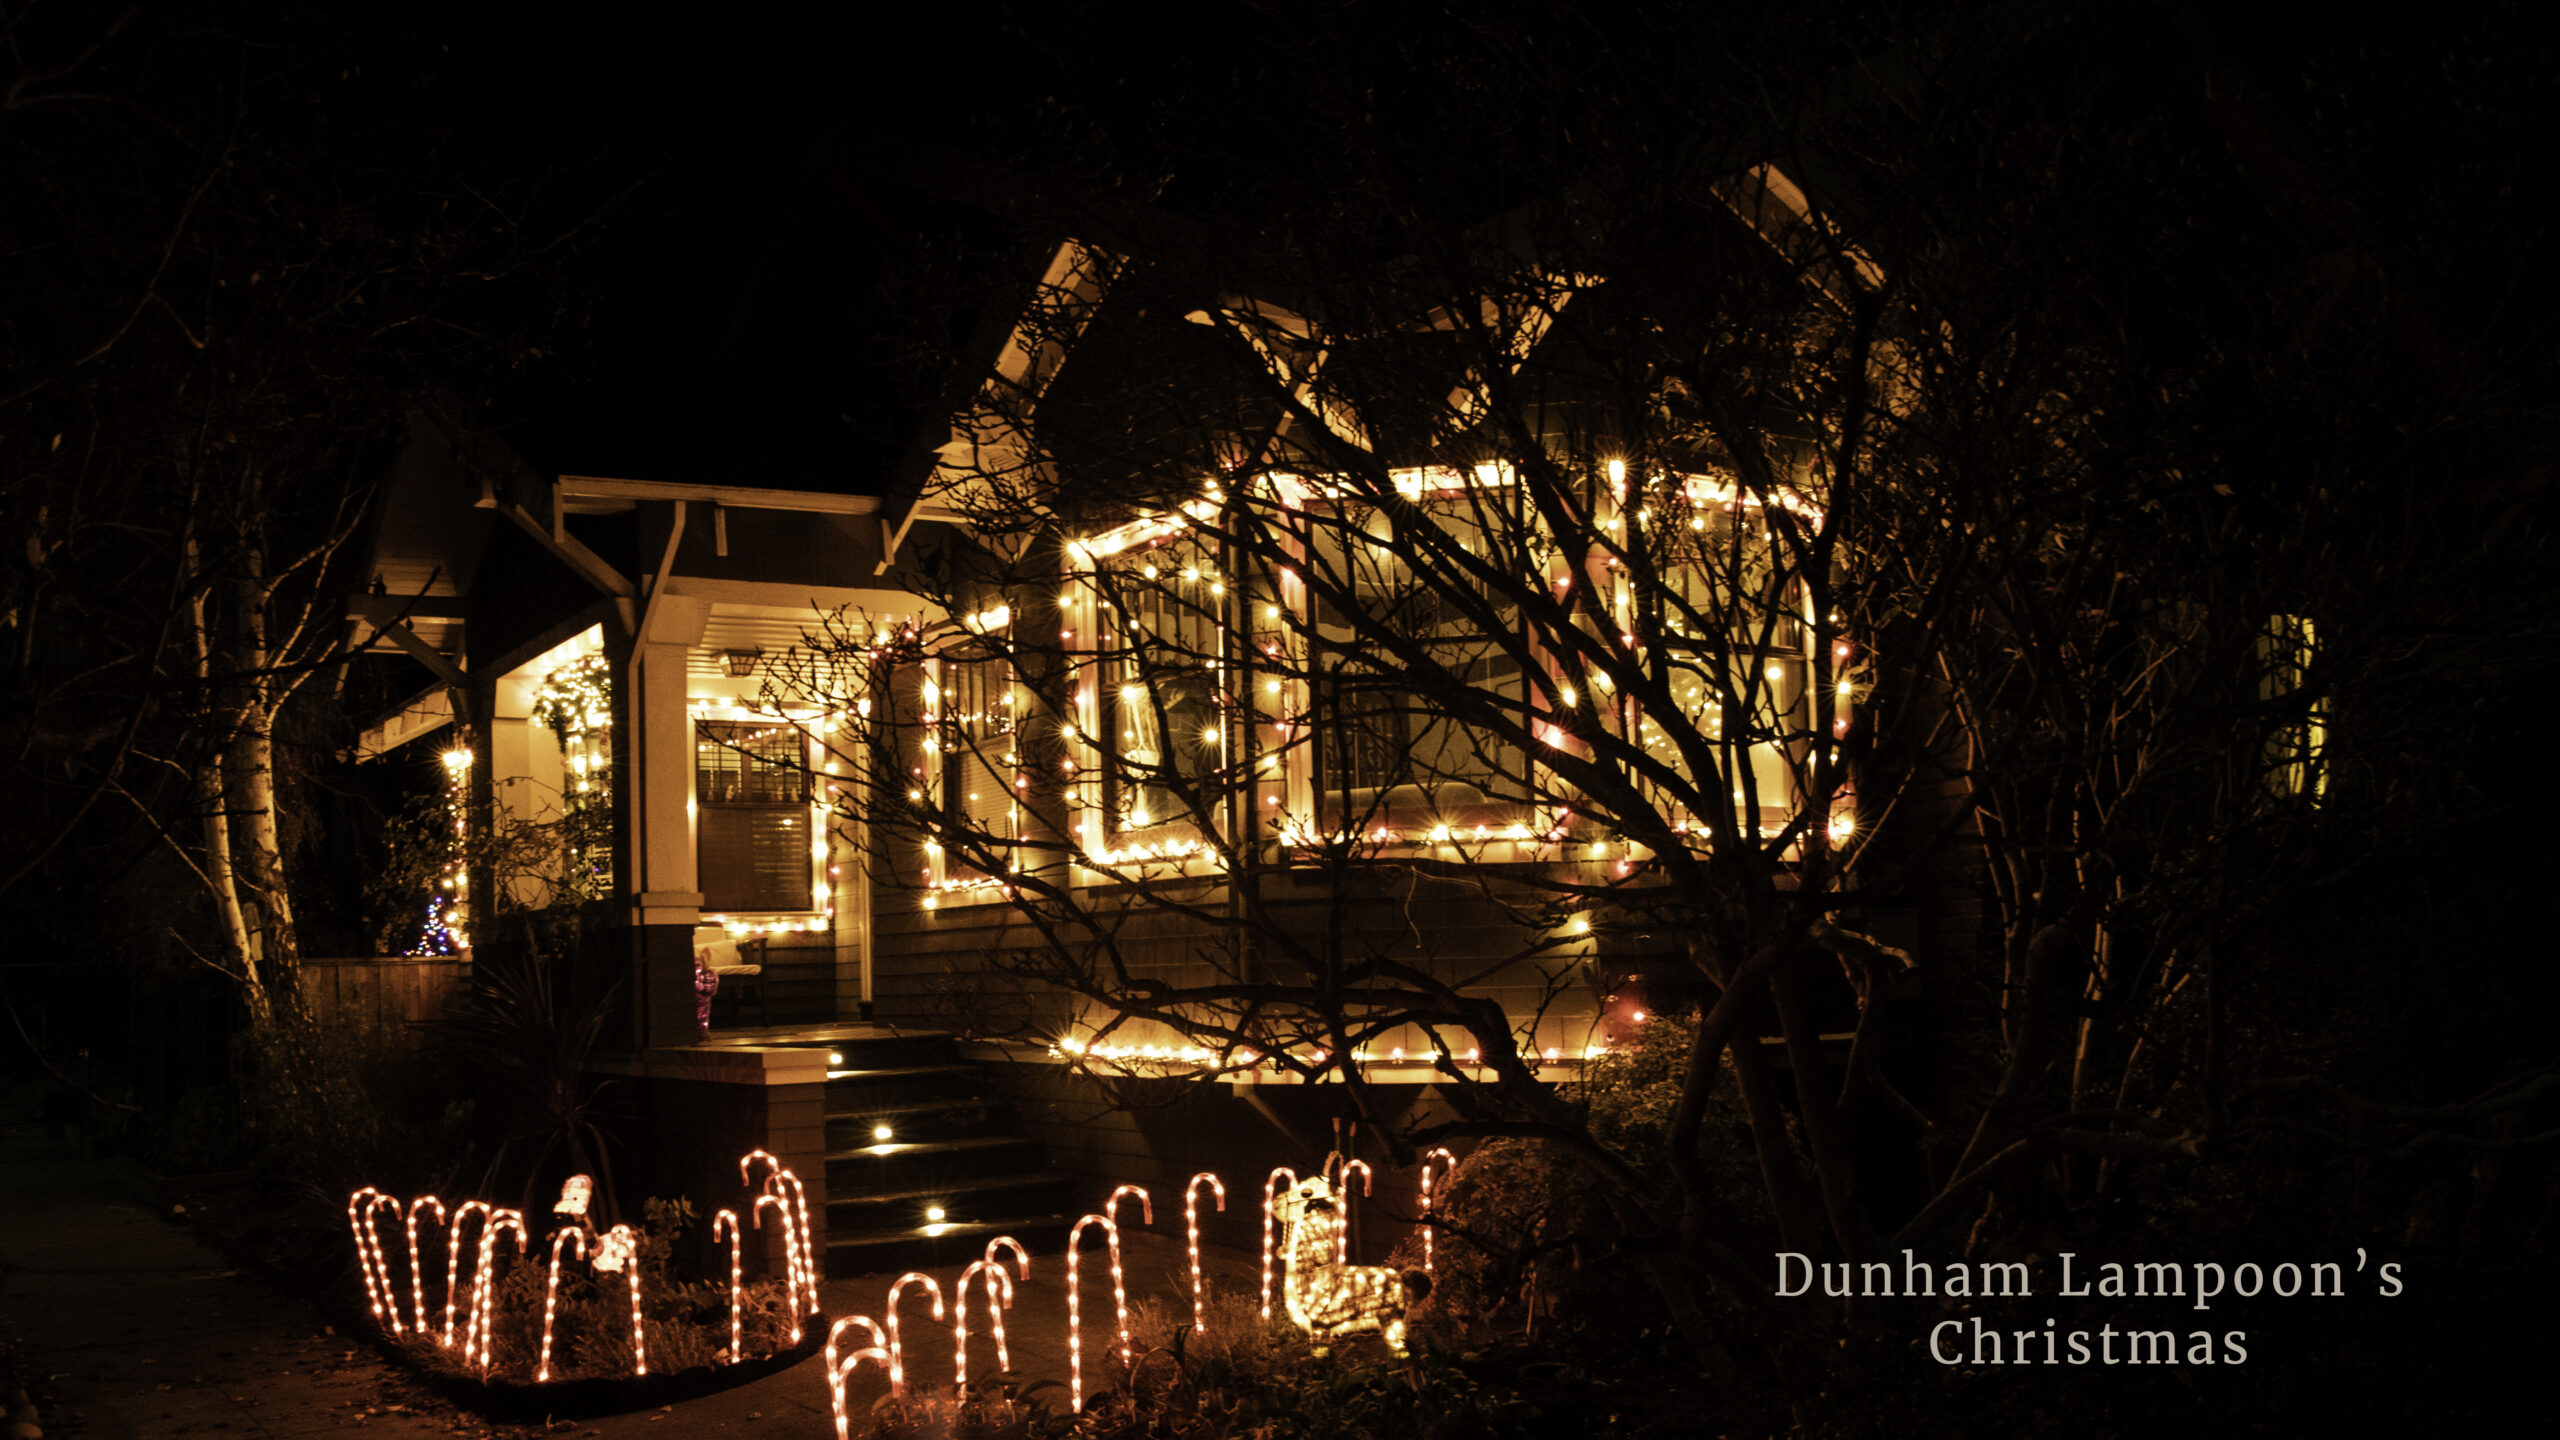 craftsman home lit up with red and white holiday nights at night